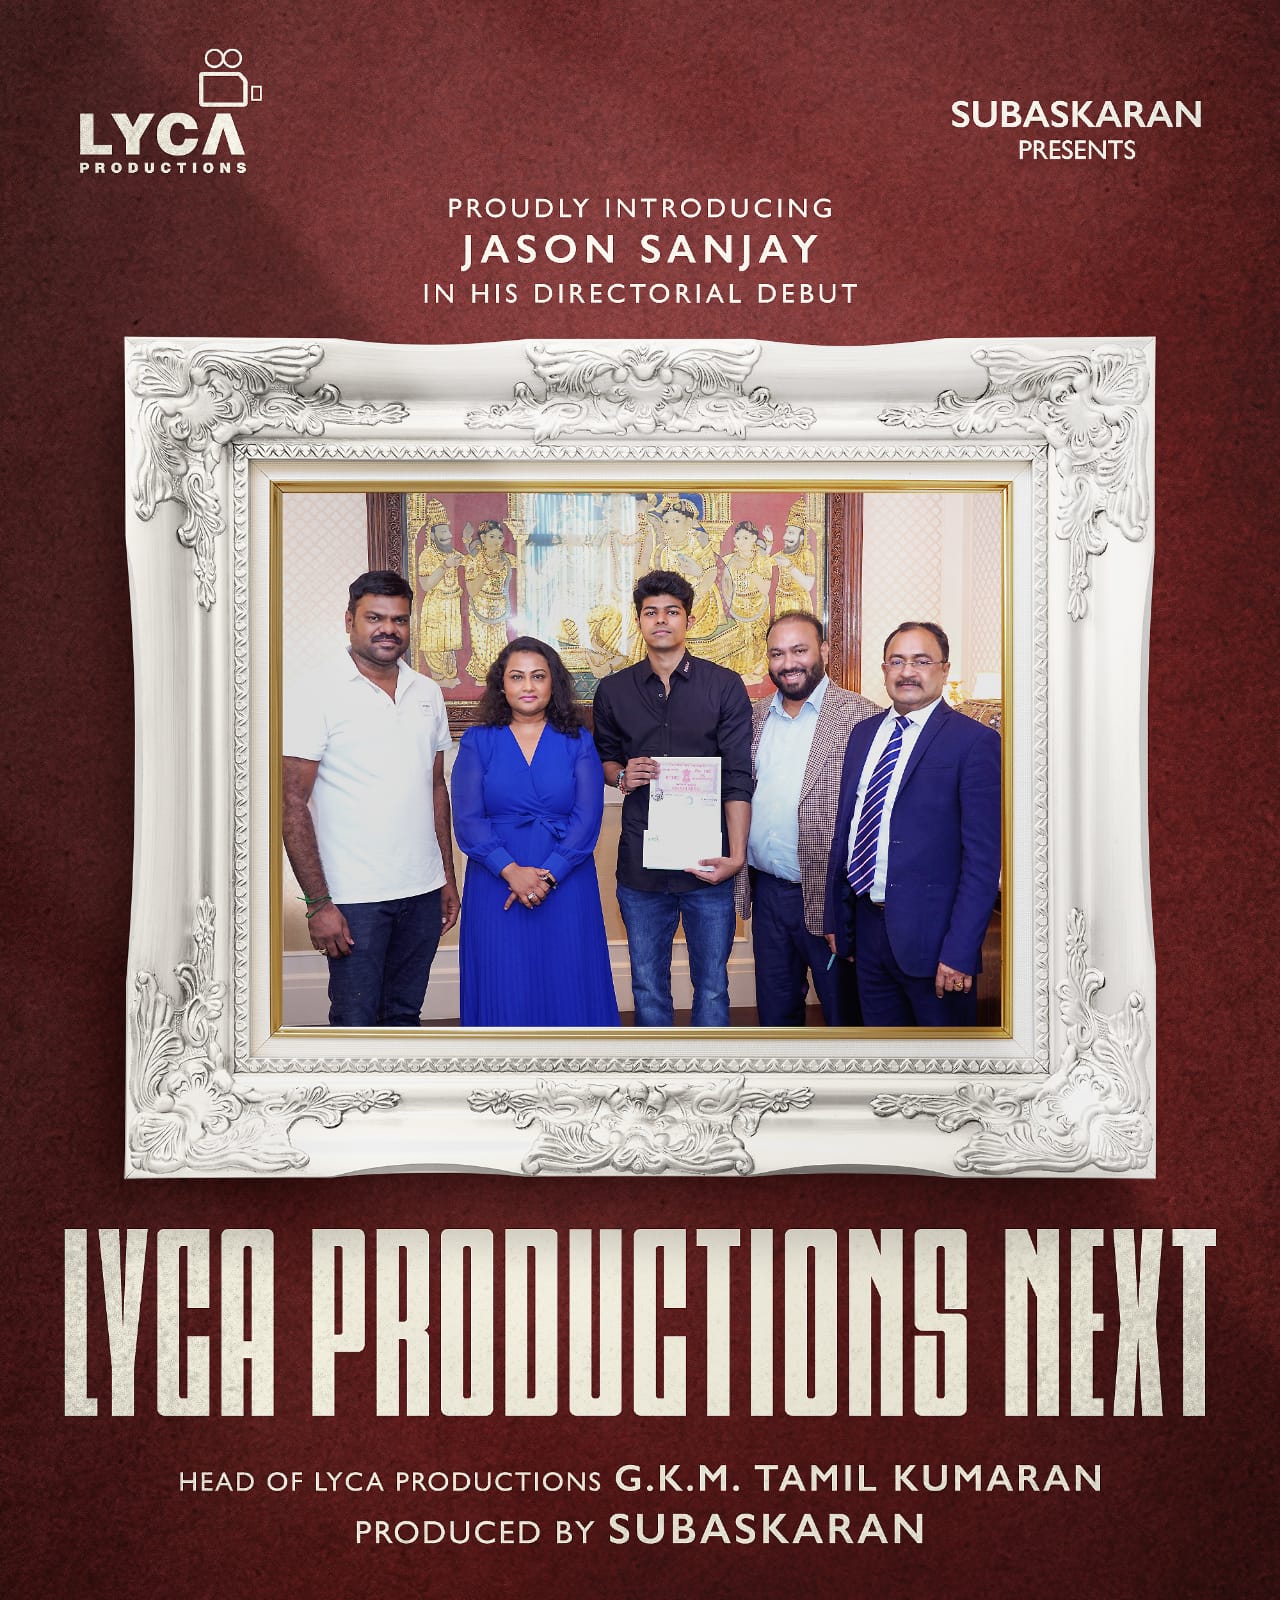 Ilayadalpati Vijay's son who became a director.. Jason Sanjay Vijay's debut film is funded by Lyca.